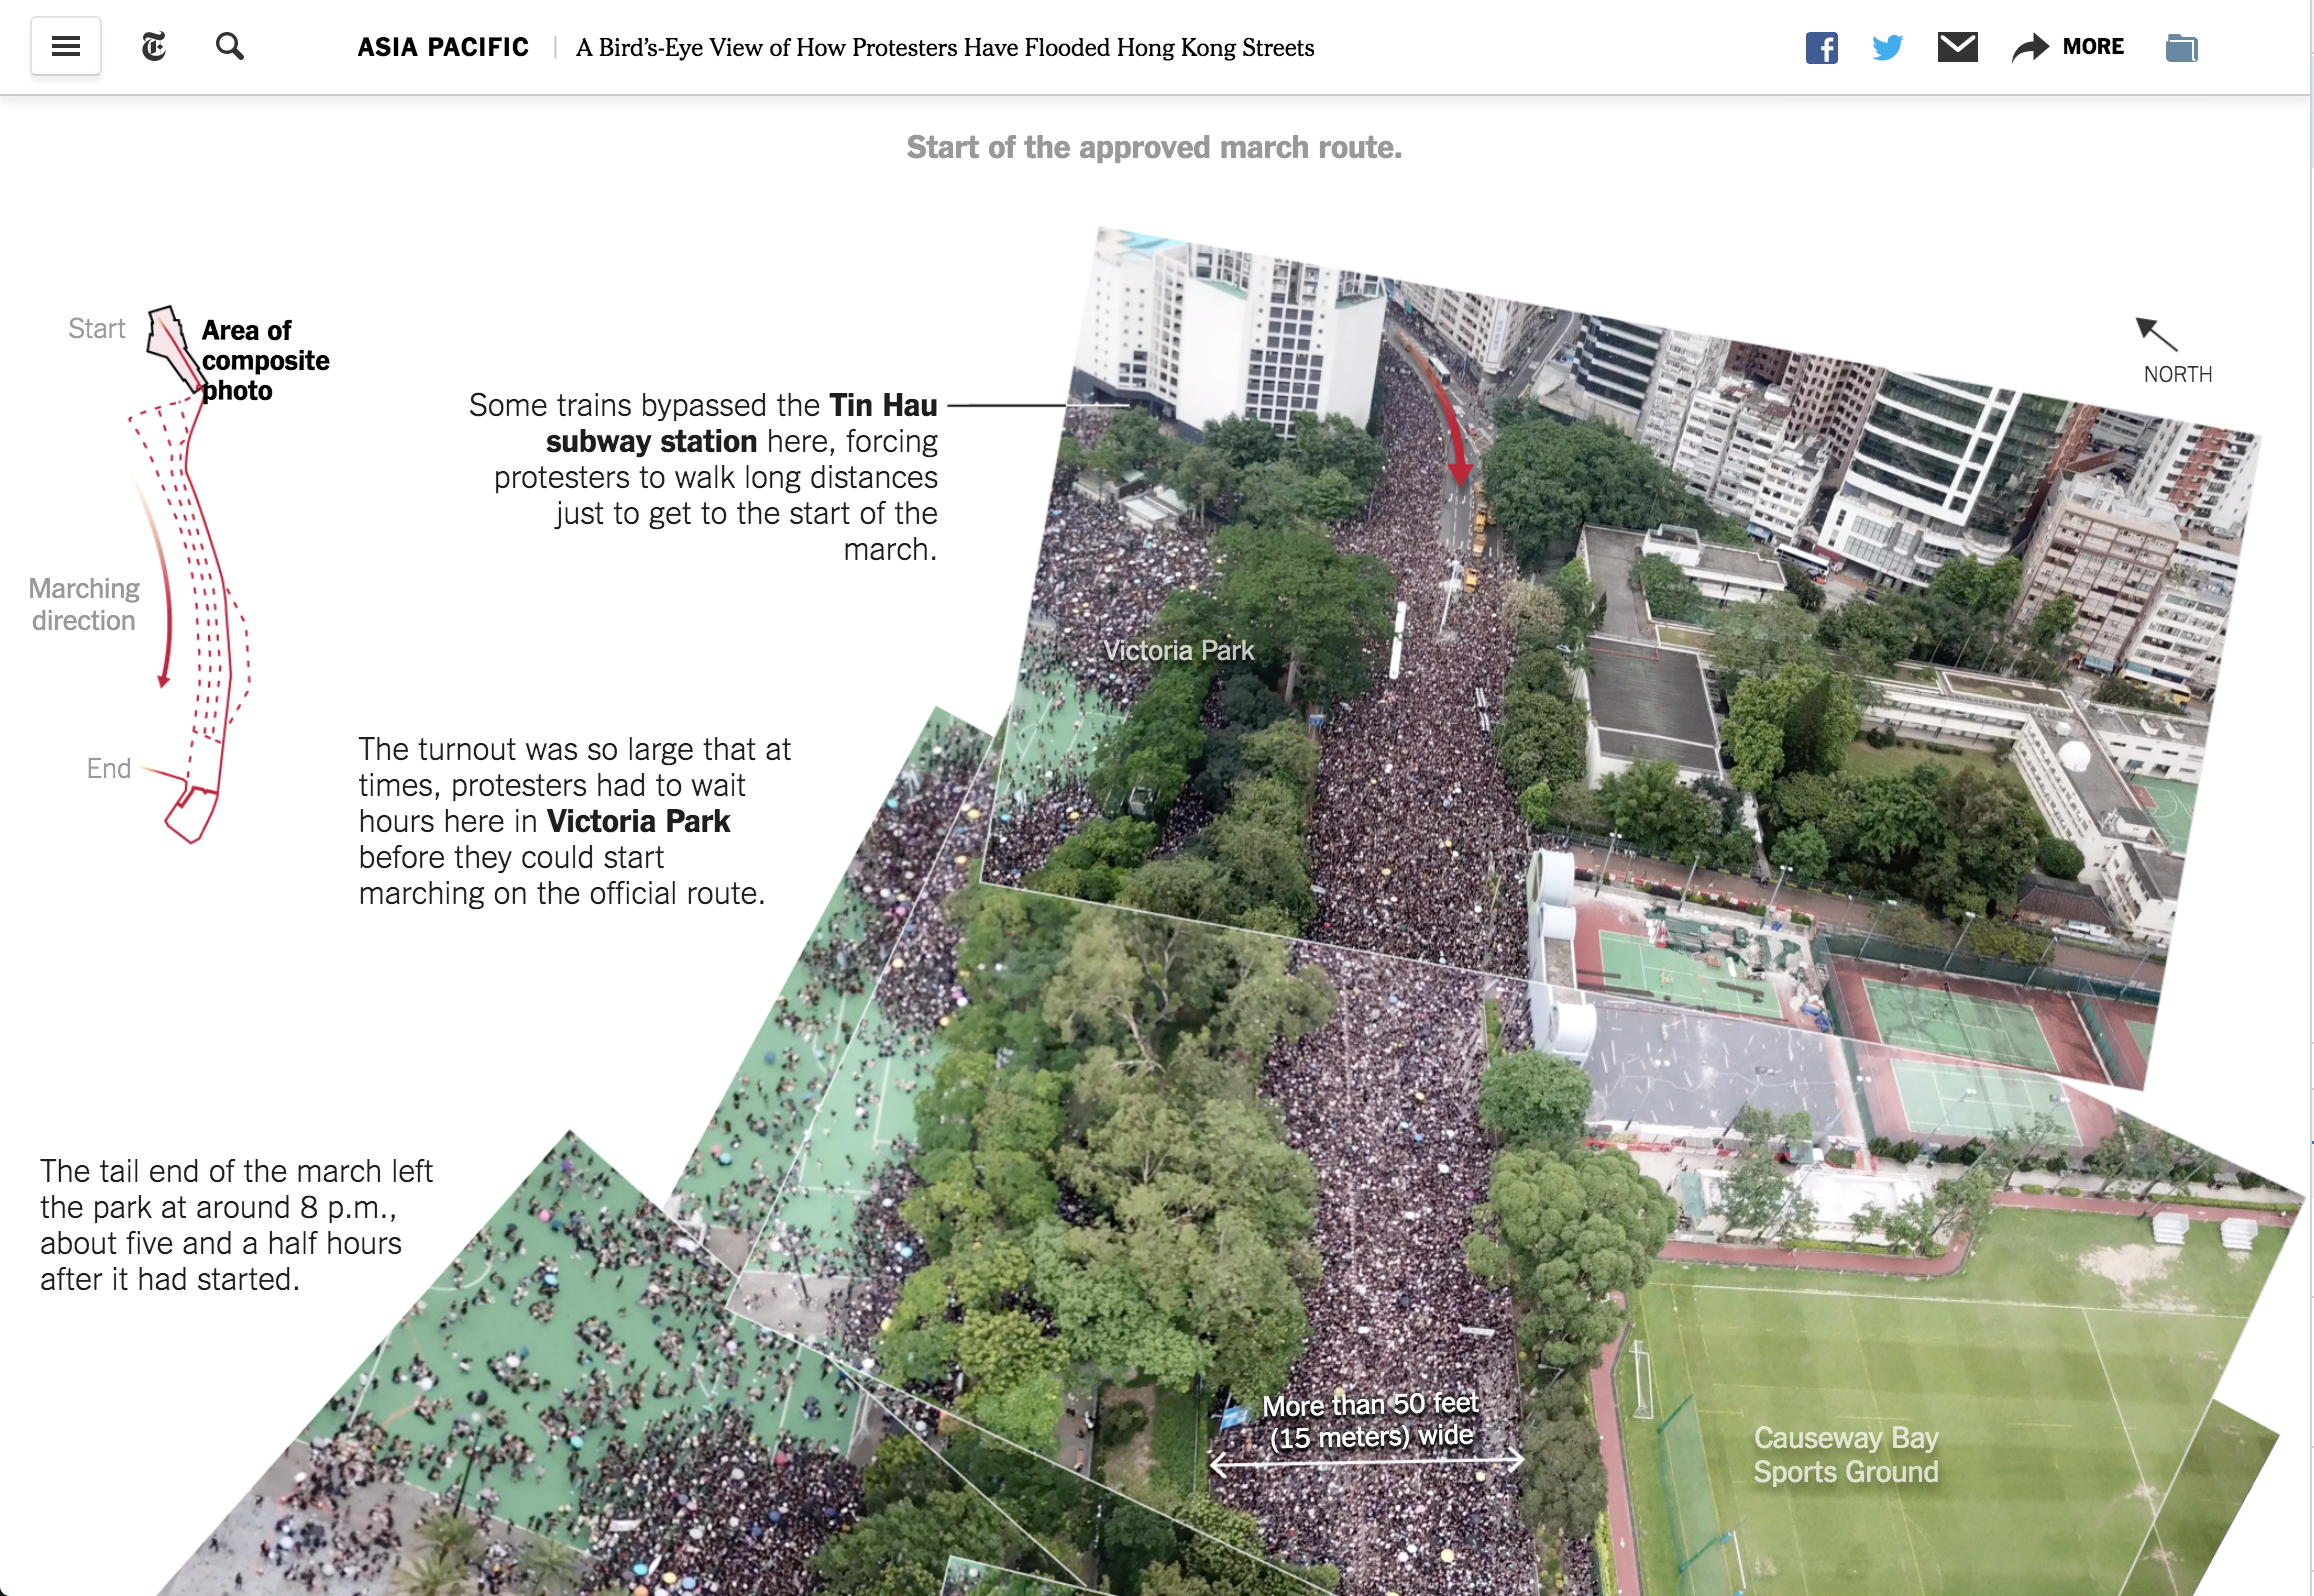 A Bird’s-Eye View of How Protesters Have Flooded Hong Kong Streets